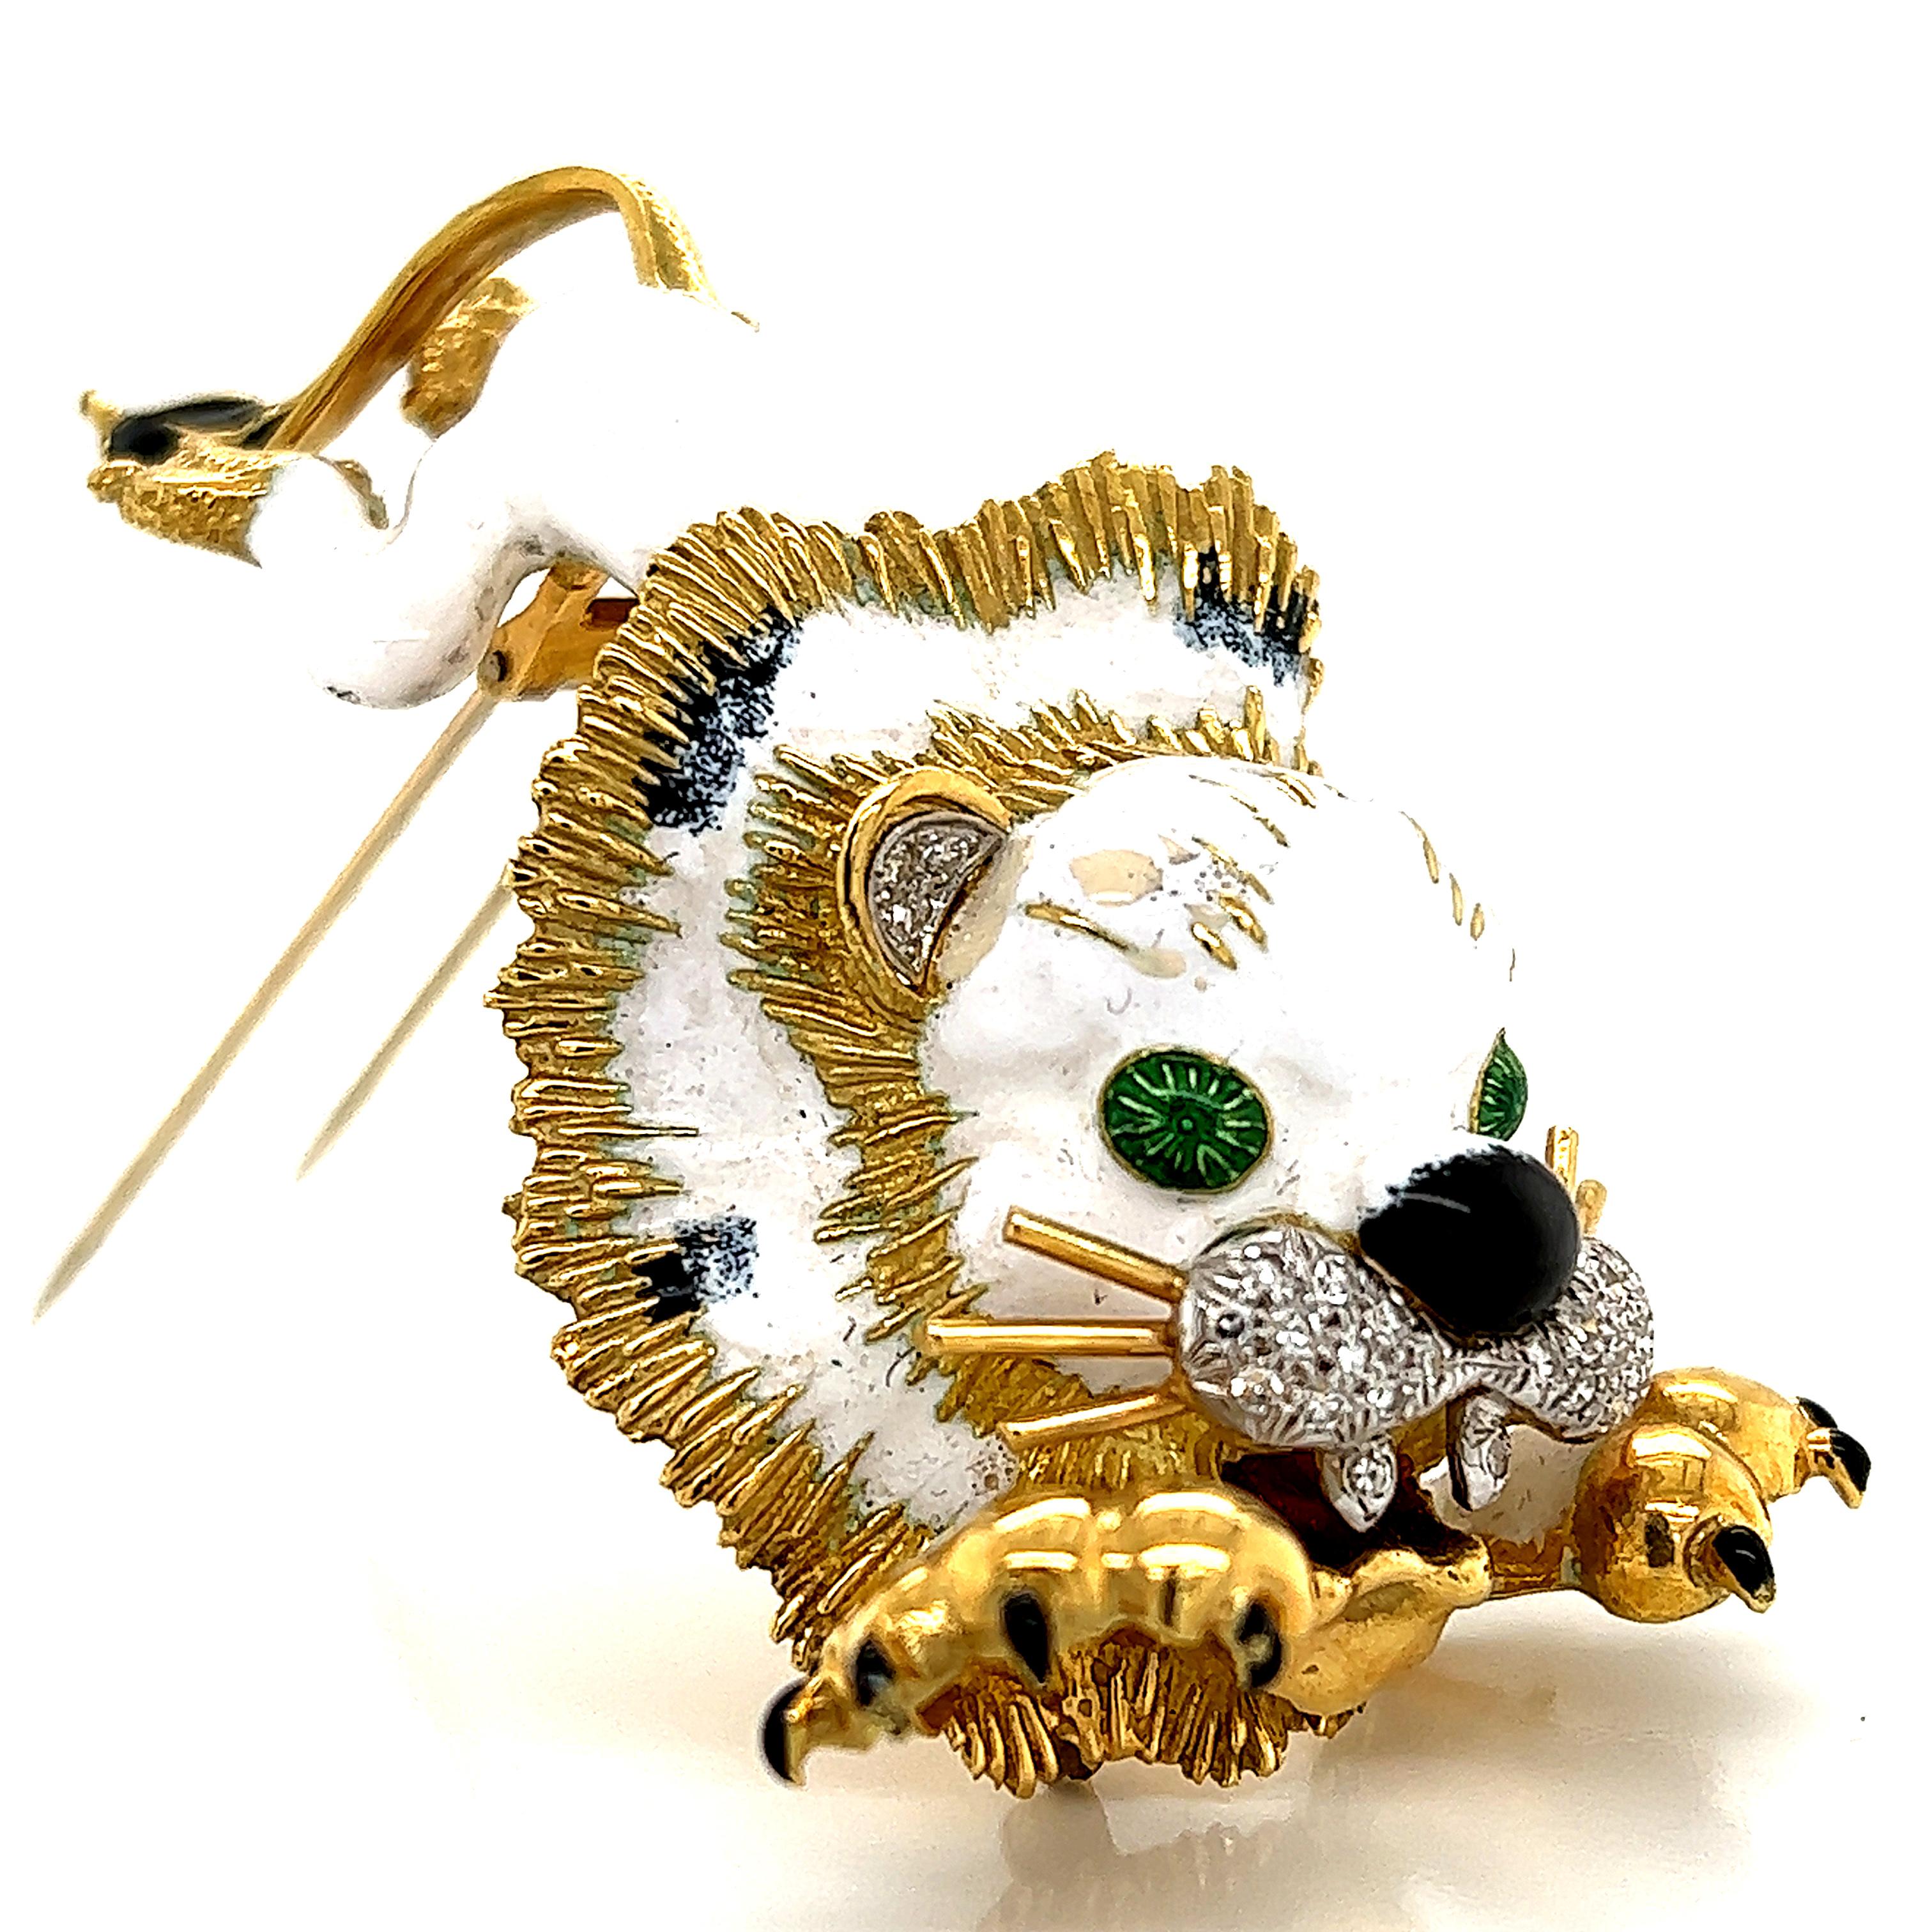 Gorgeous creation from famed American designers the Hammerman brothers. The item for your consideration today is a 18k yellow gold brooch crafted in the theme of an lion. The lion shows details throughout as it is fully enameled with white, green